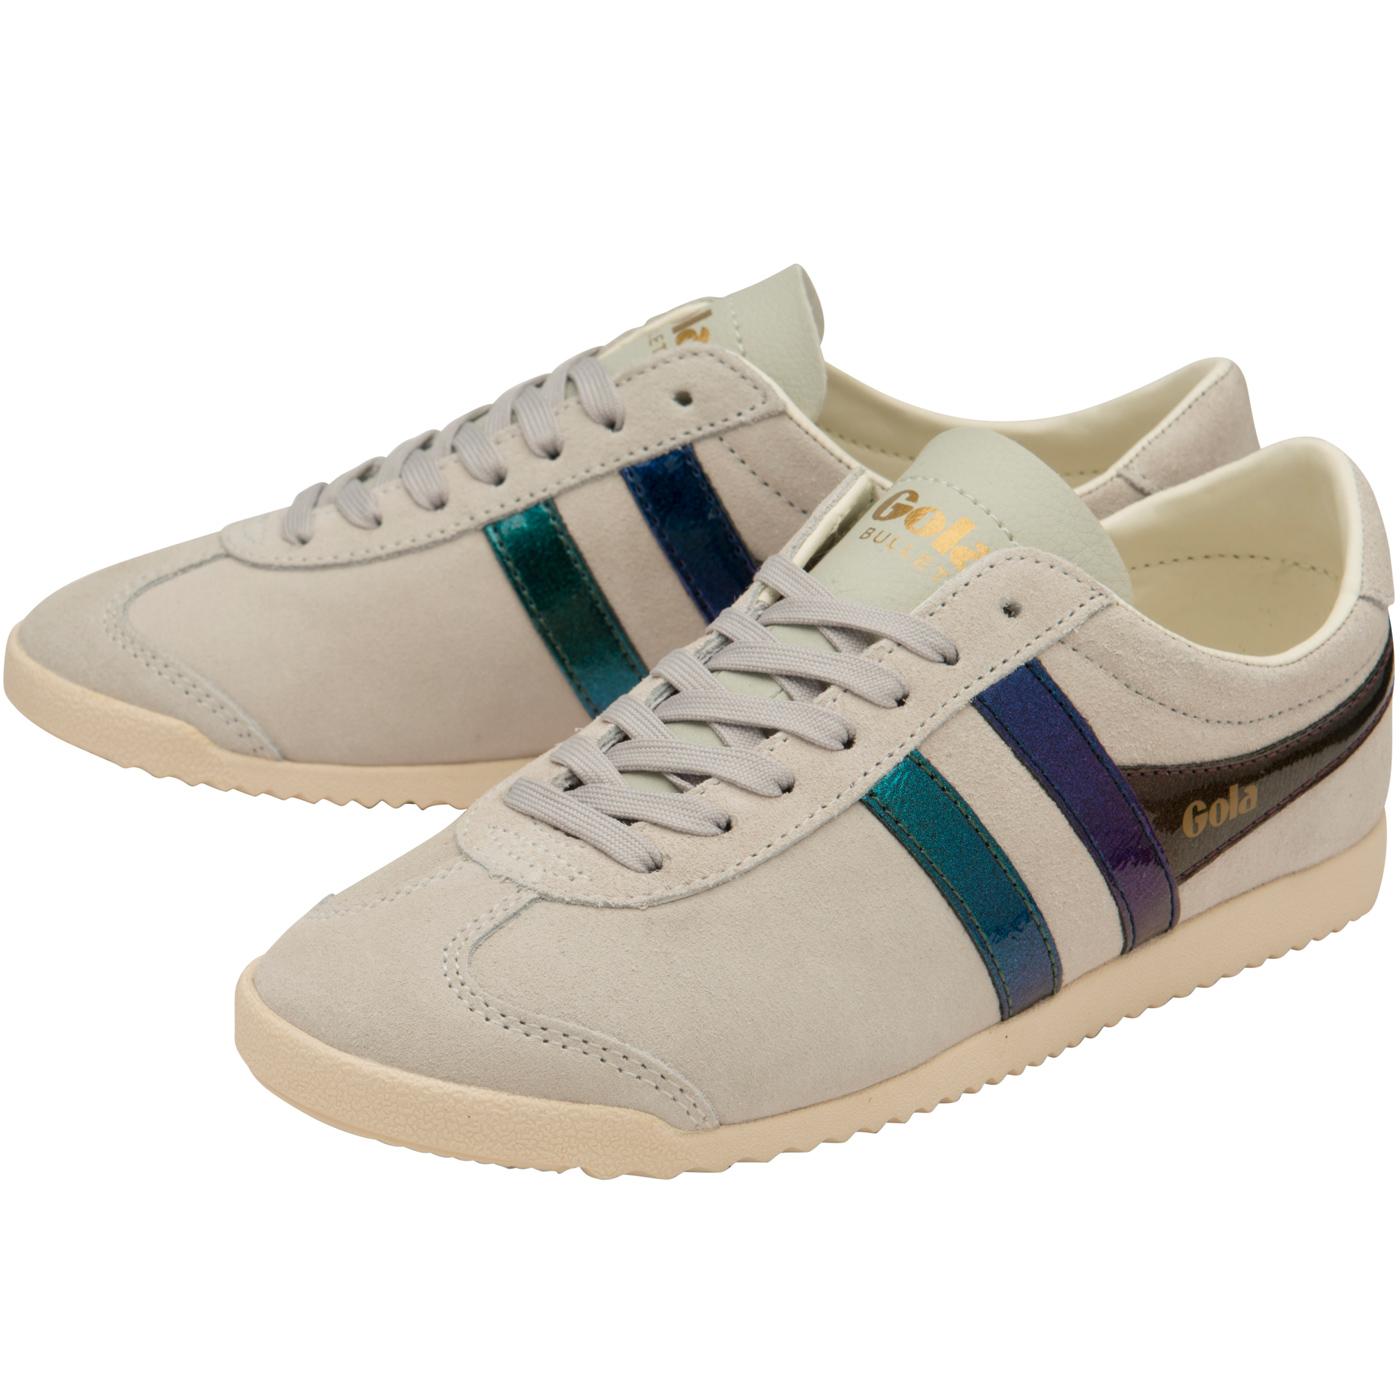 GOLA Bullet Flash Women's Retro Suede Trainers in Off White